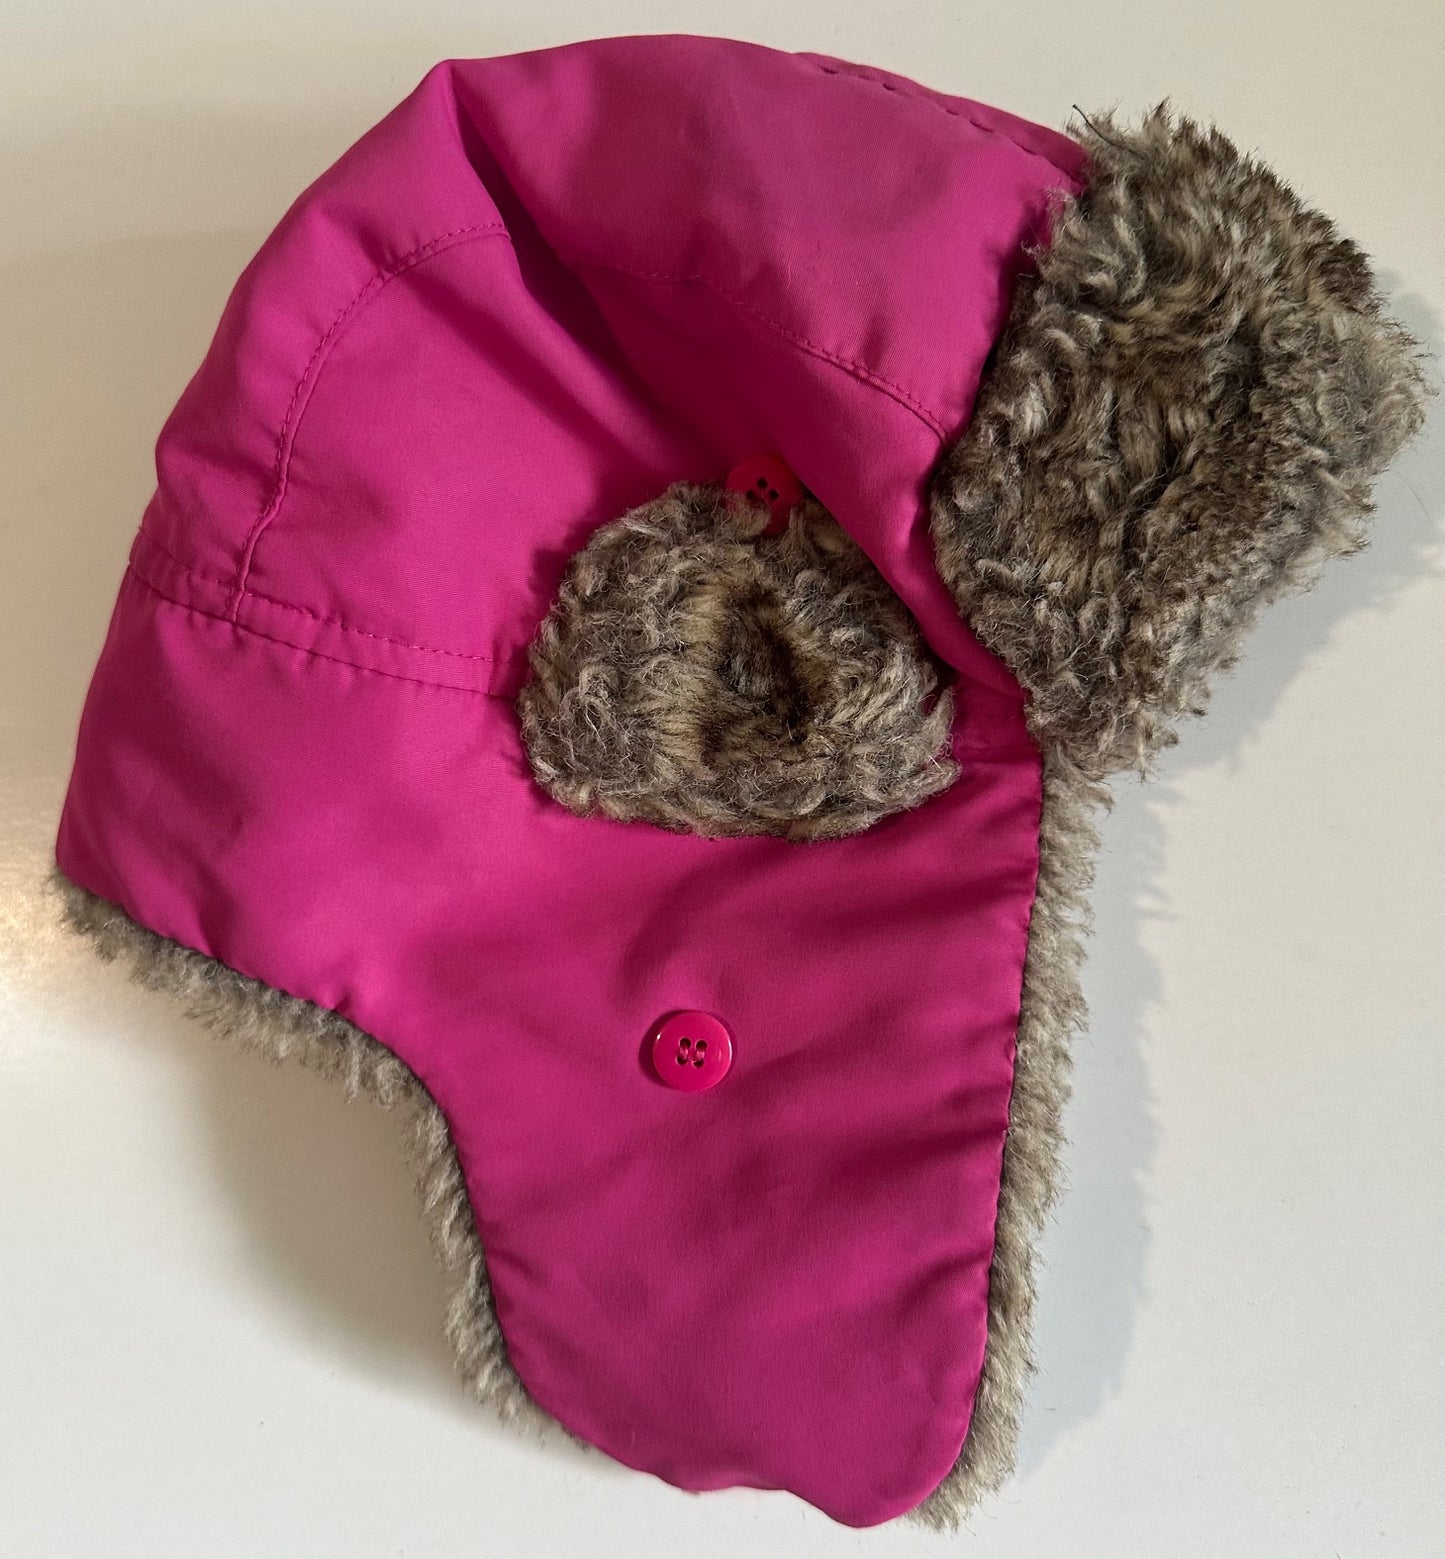 Unknown Brand, Pink Fur-Lined Winter Hat - Size 3-6